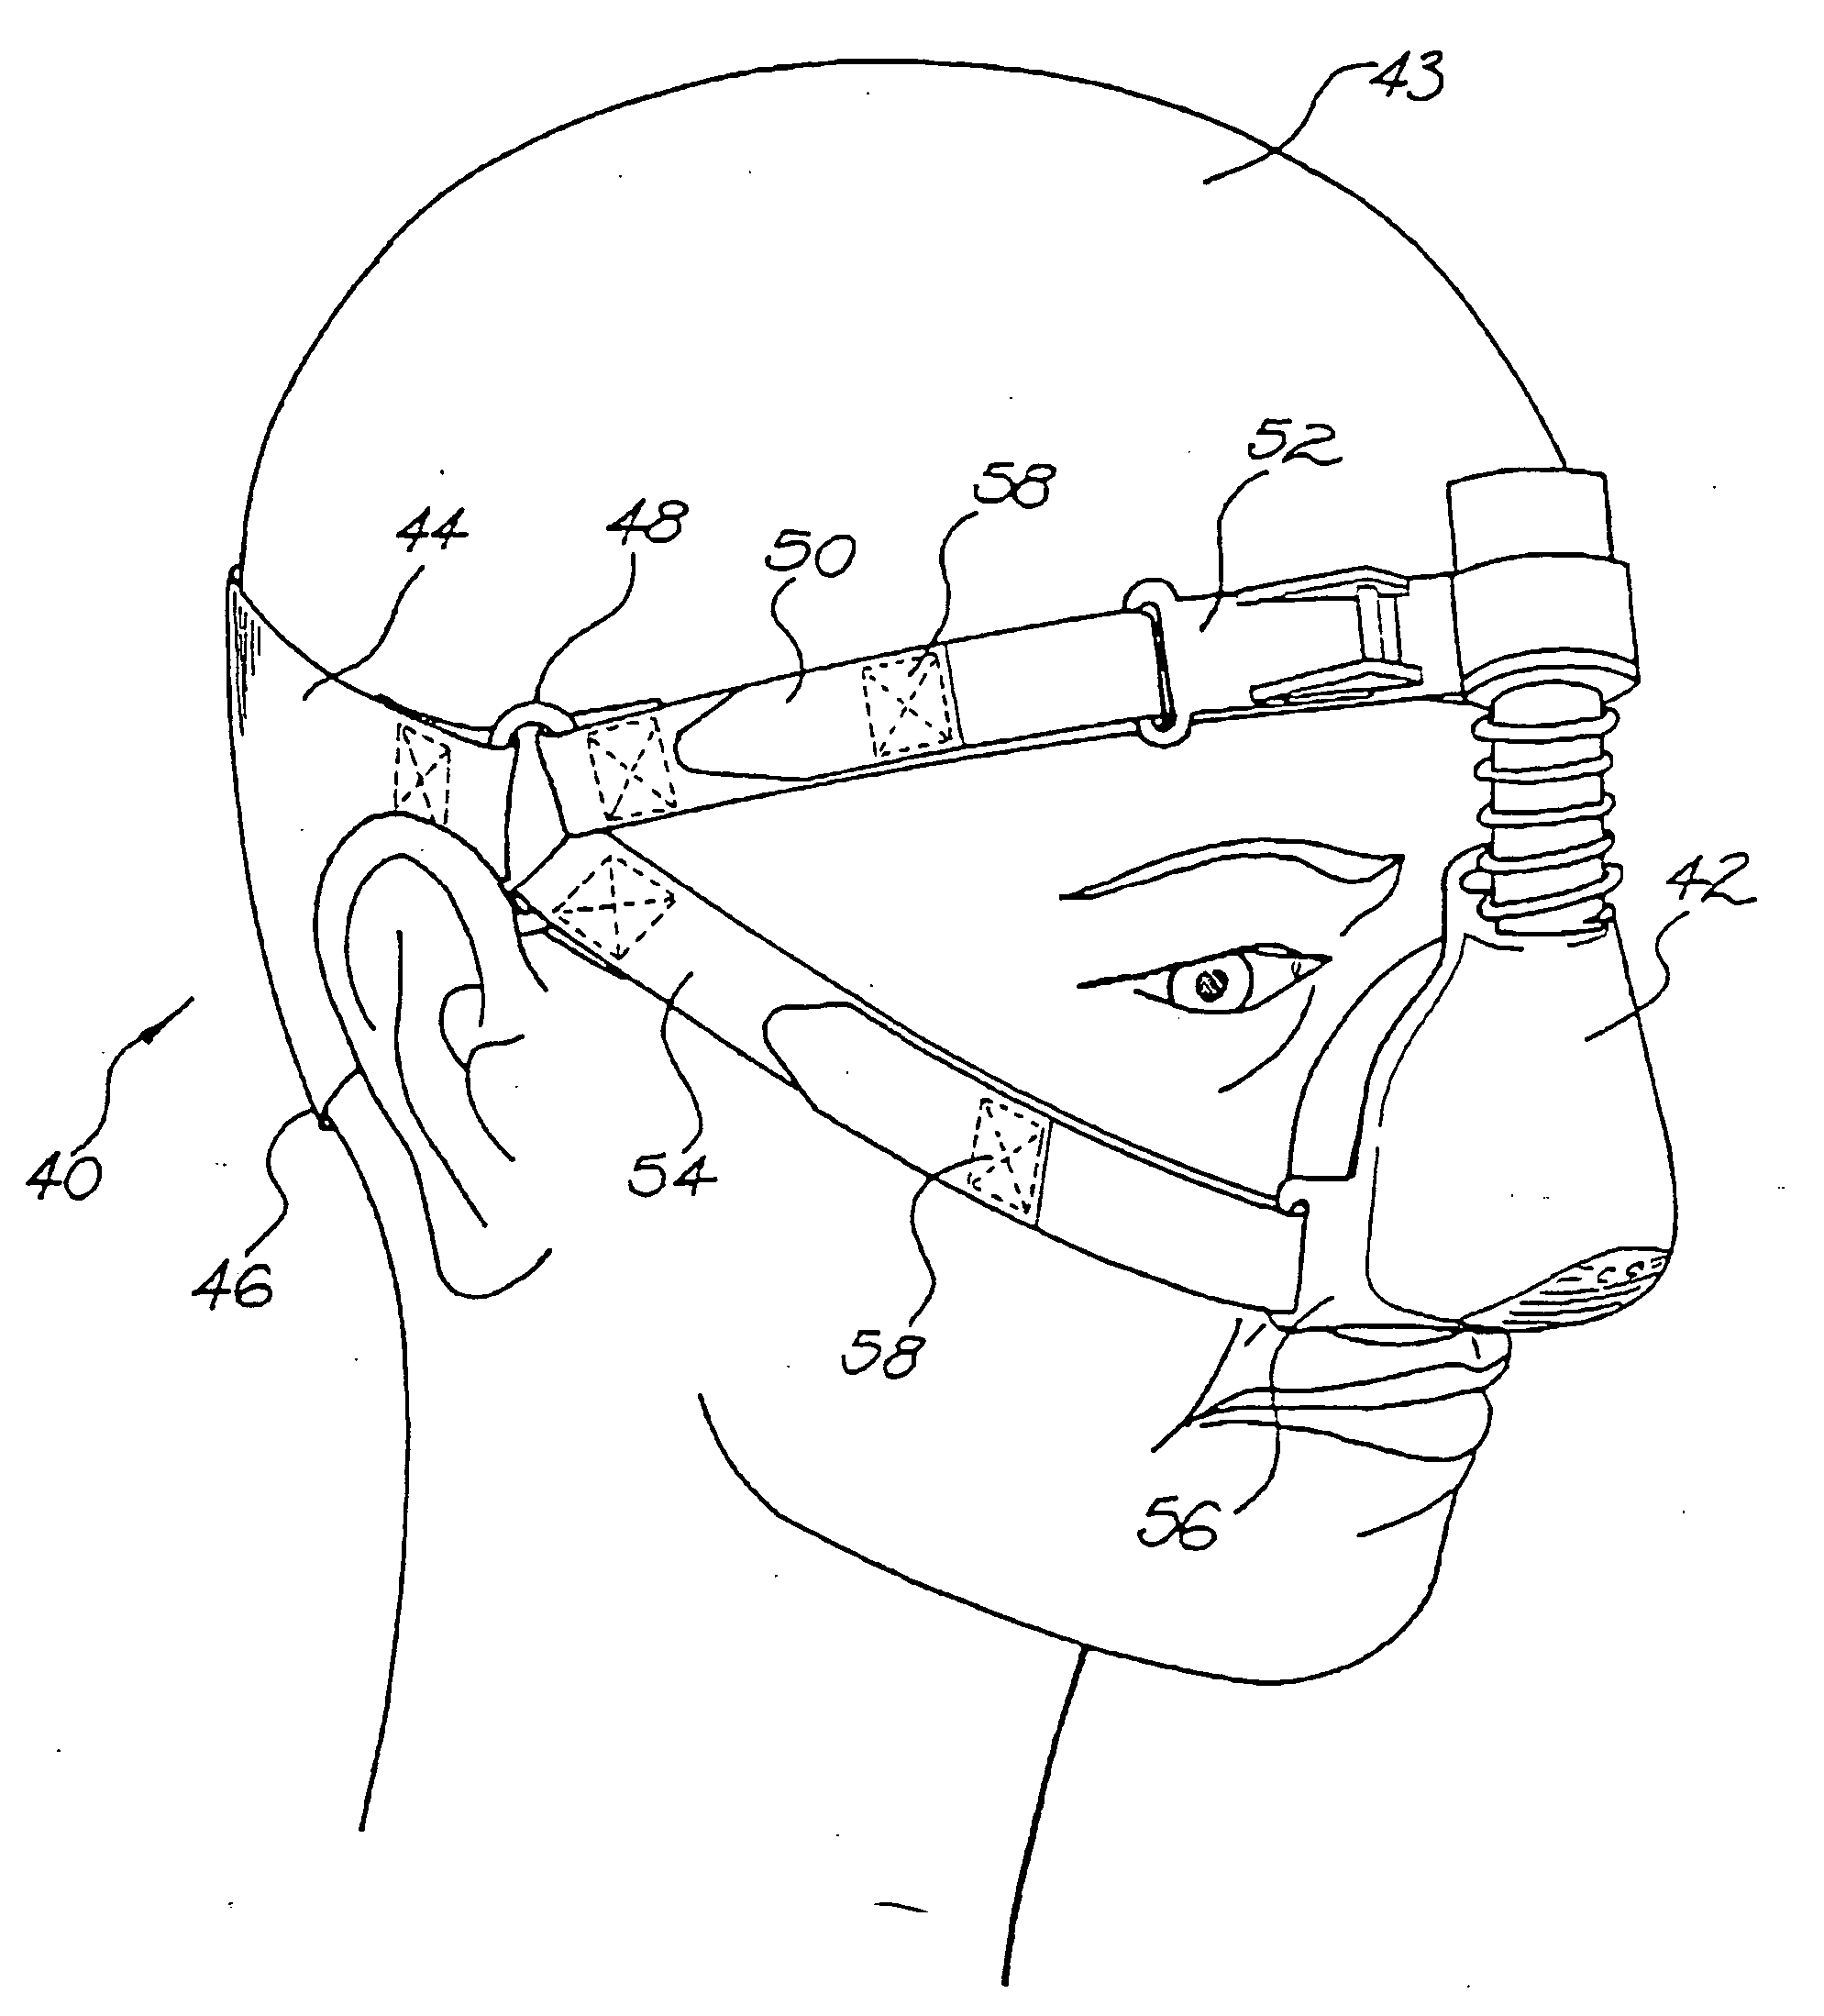 Harness assembly for a nasal mask